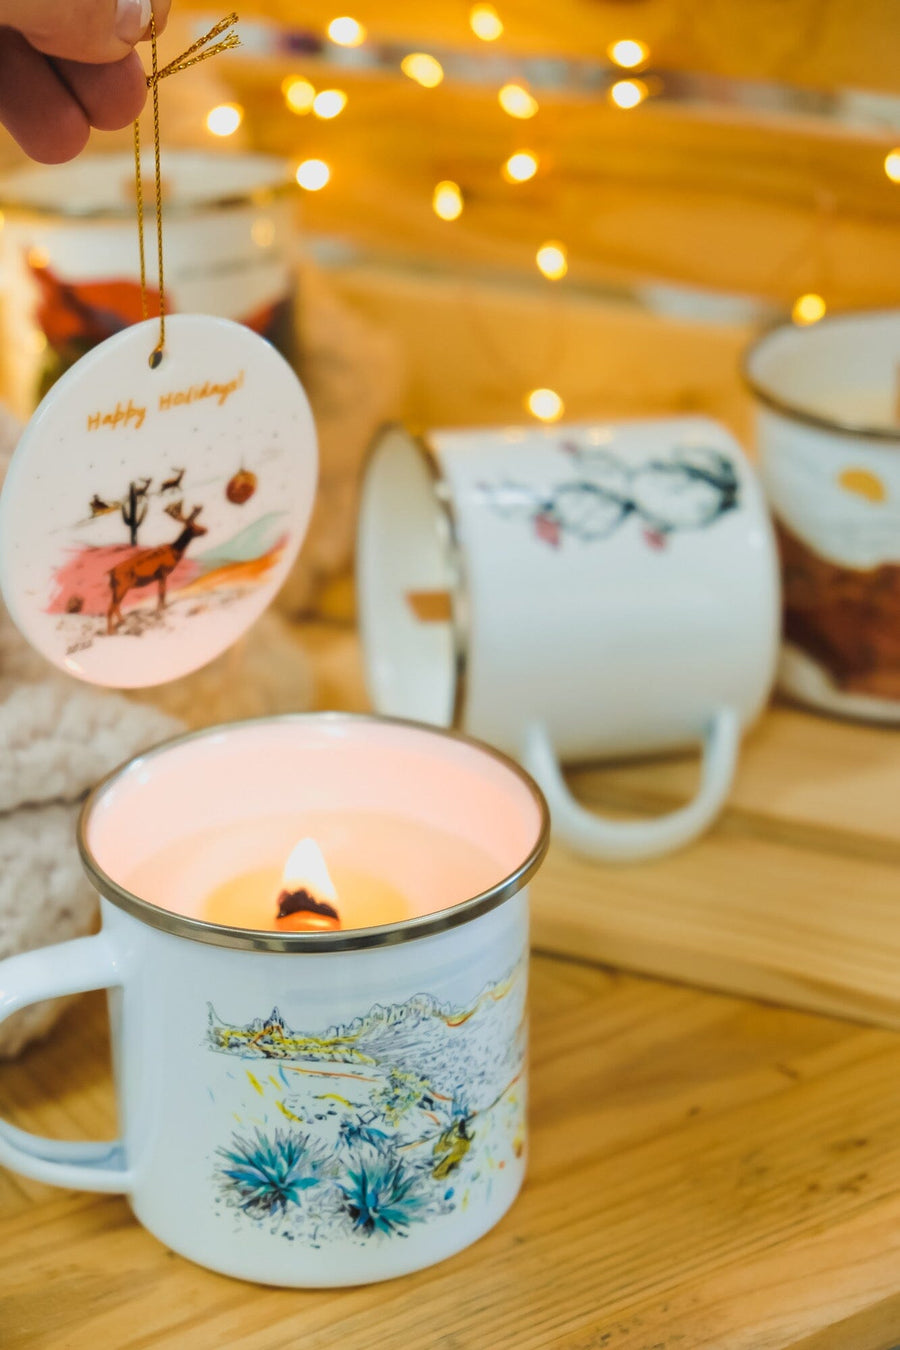 National Park-Inspired Organic Camp Mug Candle | Eco-friendly Scented Soy, Coconut & Beeswax | Wood Wick | Unique Gift candle Couloir[art] 